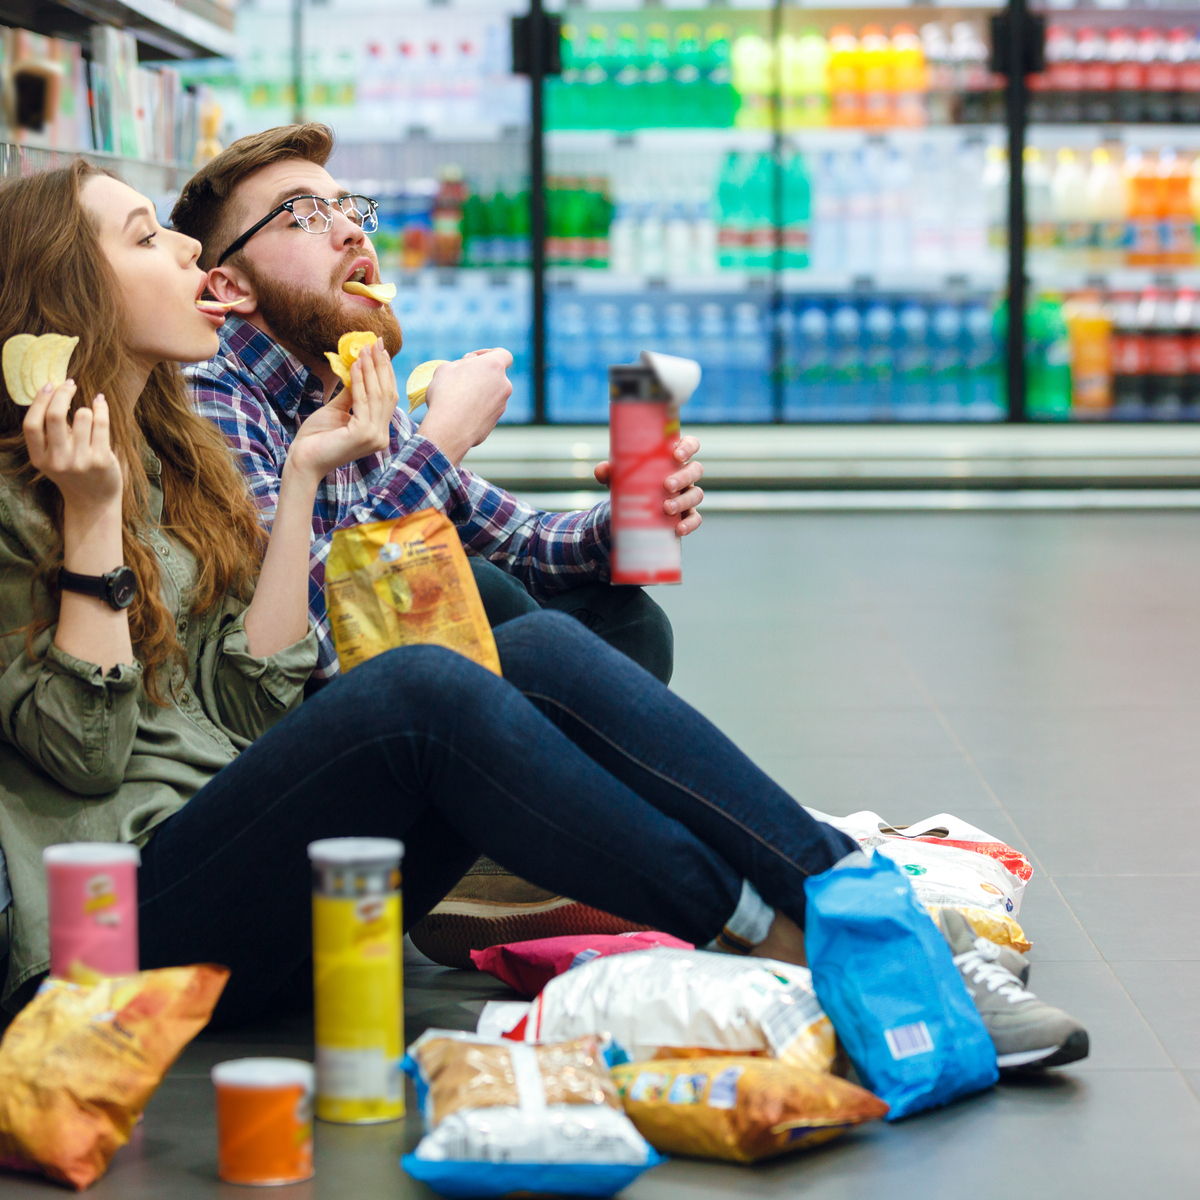 Couple eating junk food